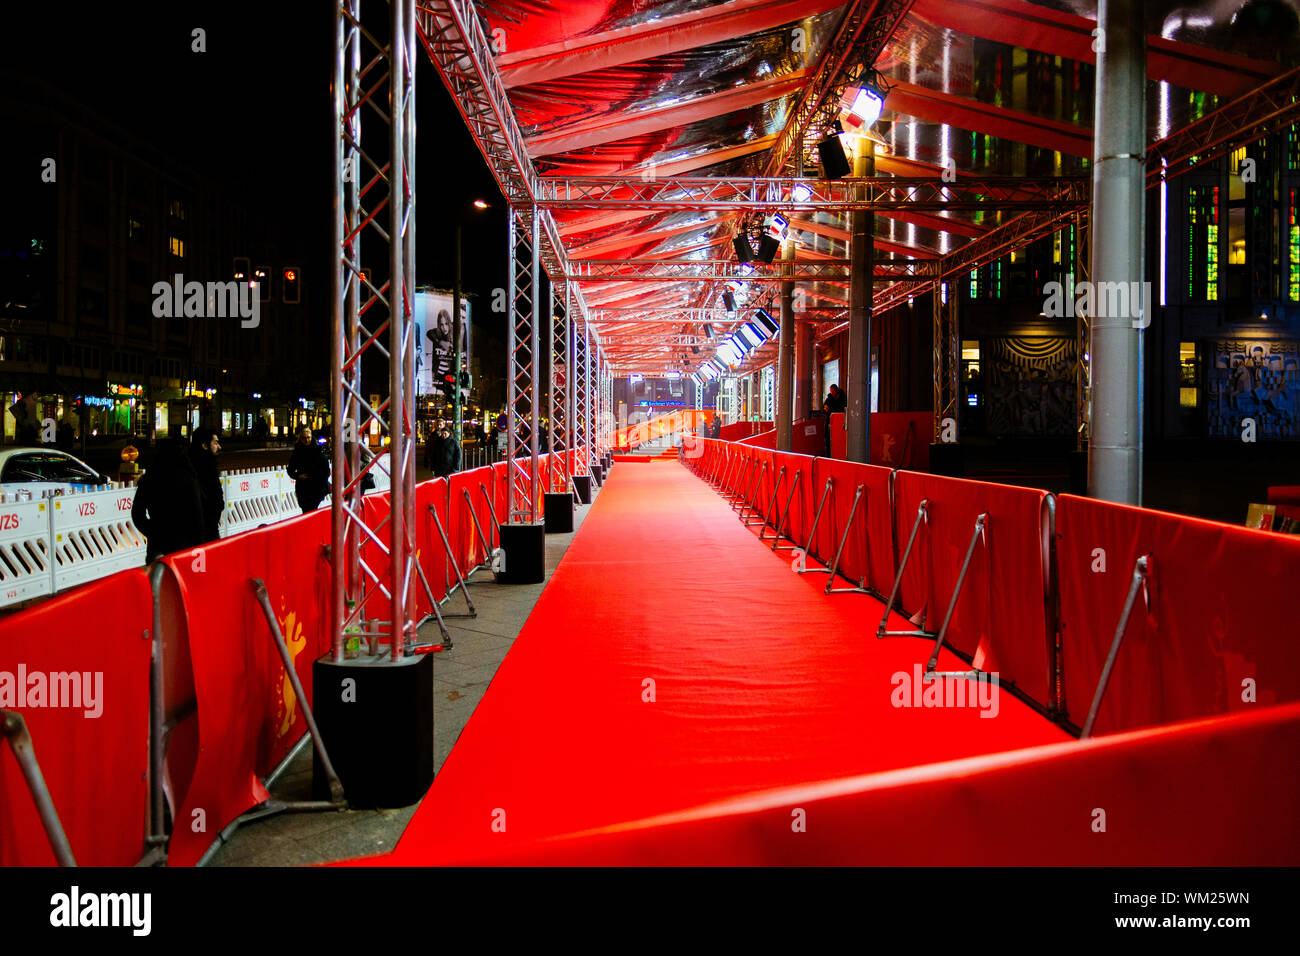 Red Carpet In Event At Night Stock Photo